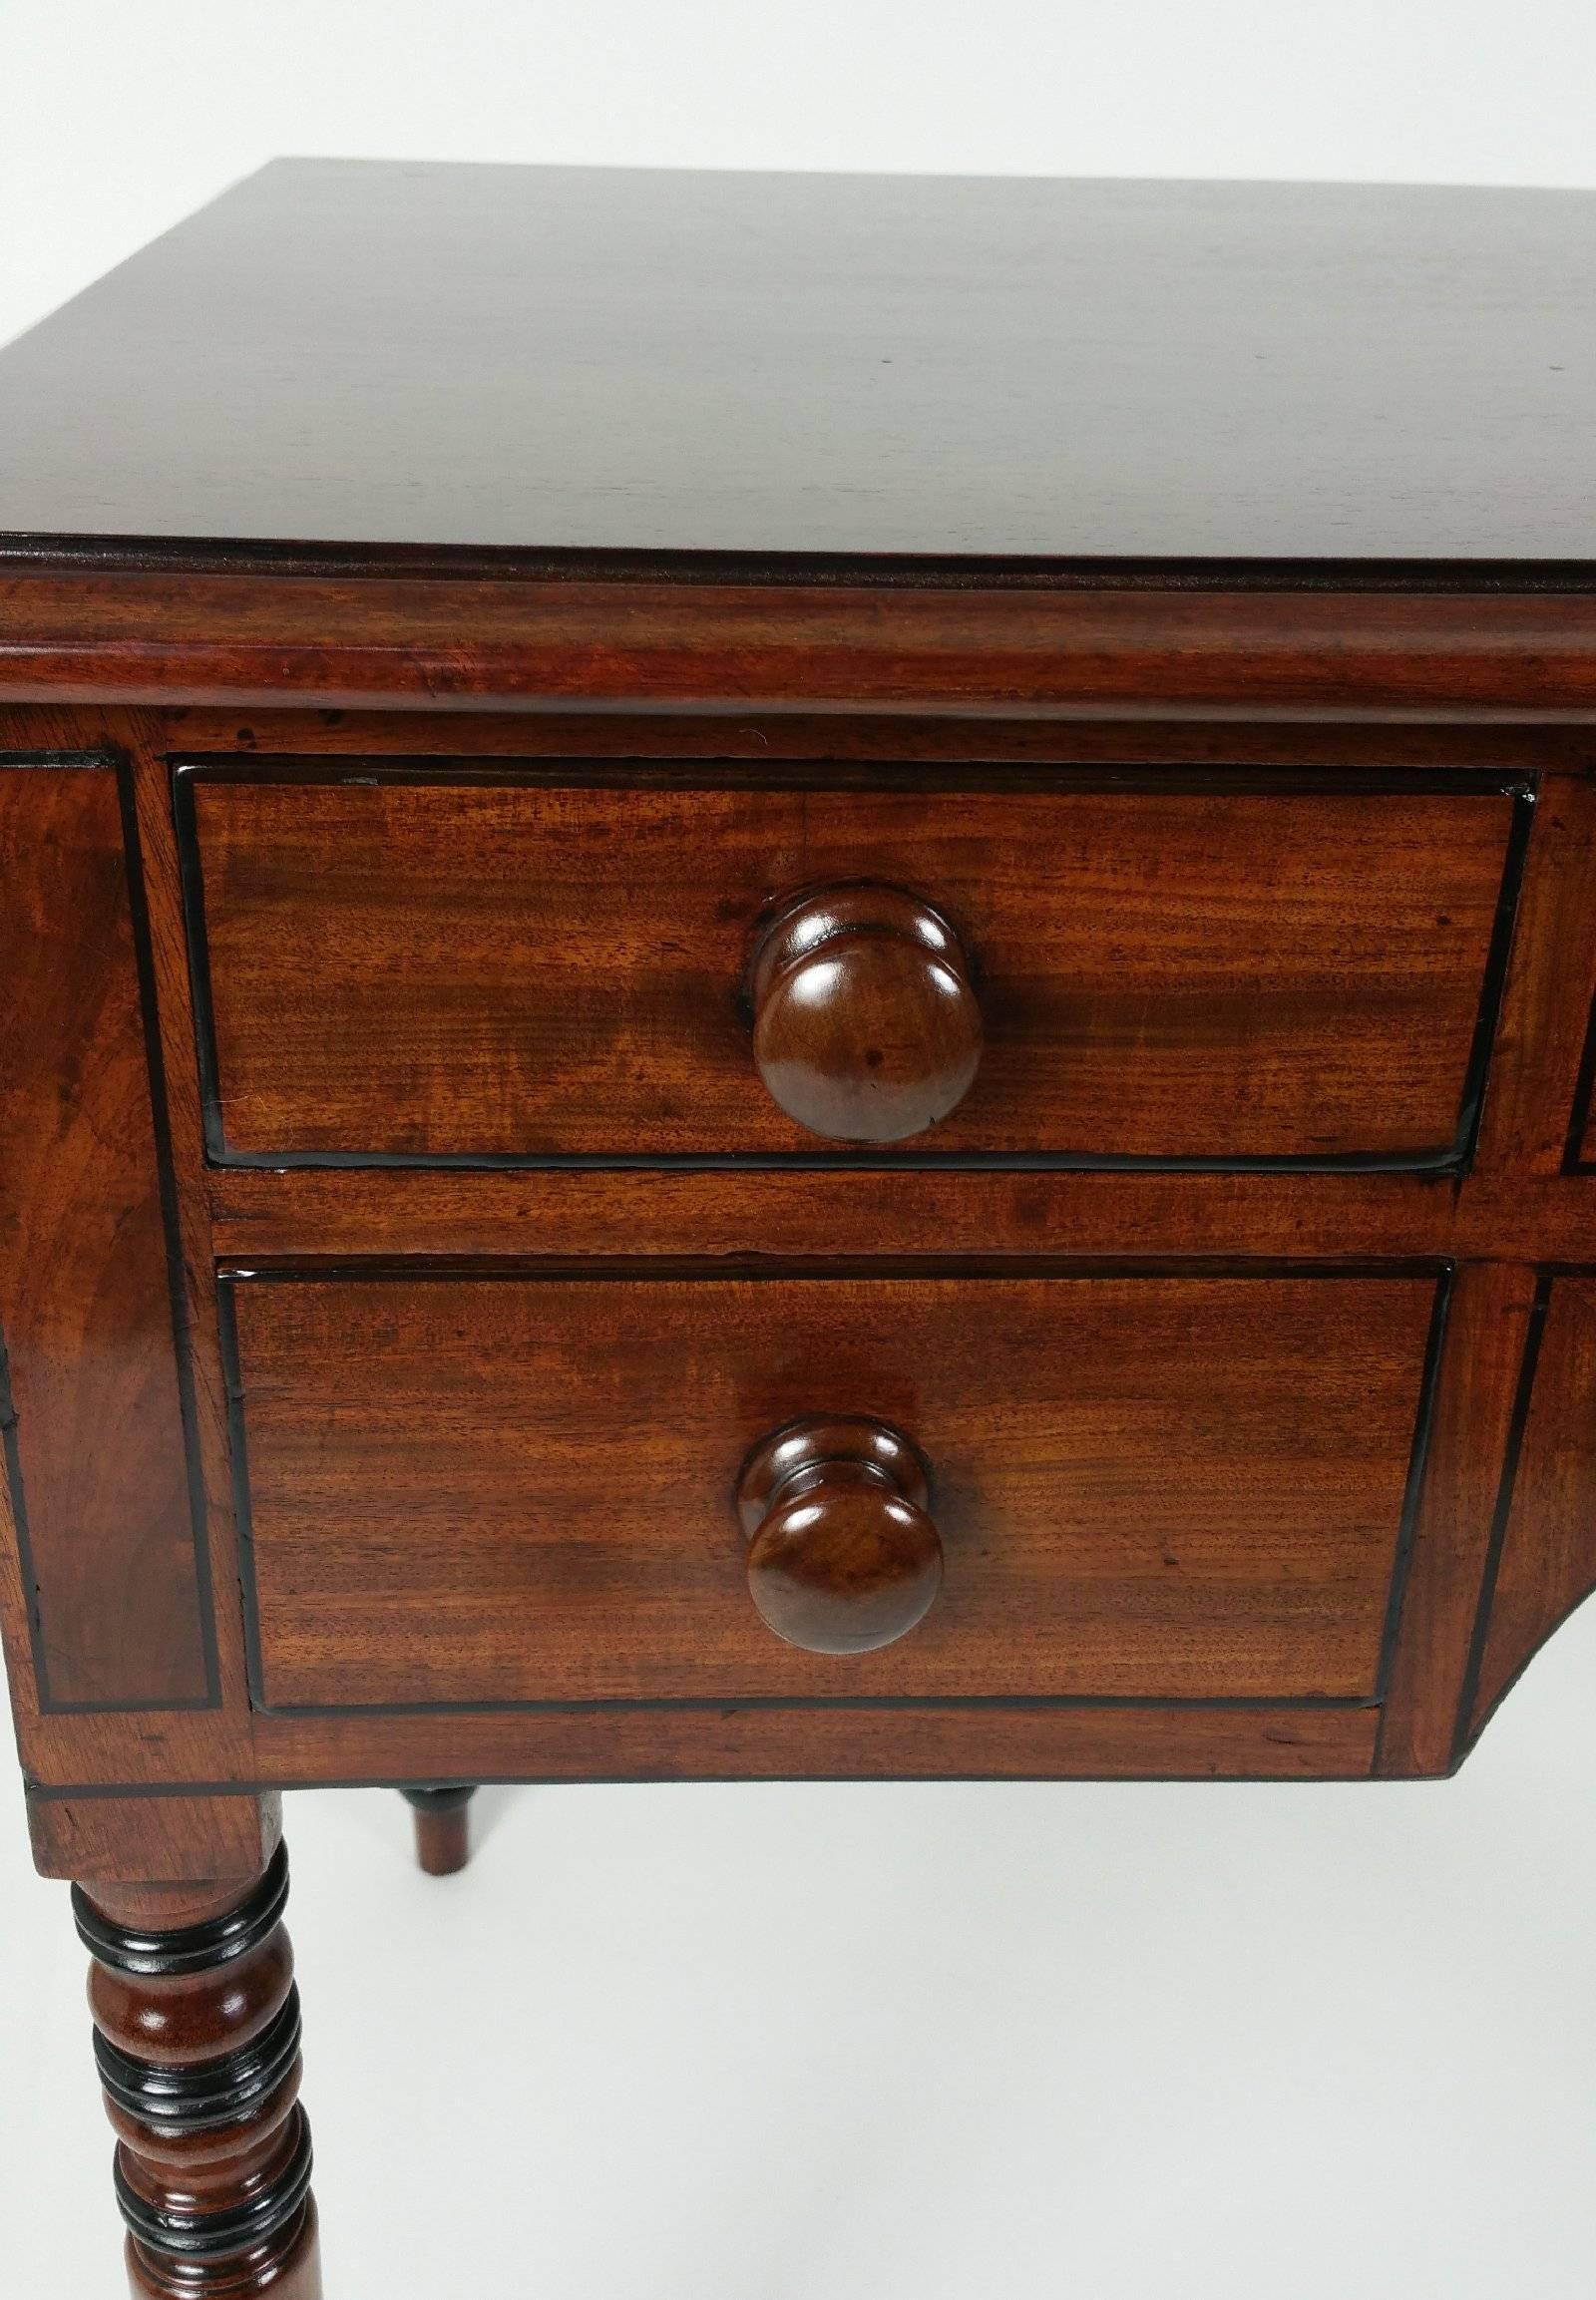 Regency Mahogany Kneehole Side Table In Good Condition For Sale In London, west Sussex